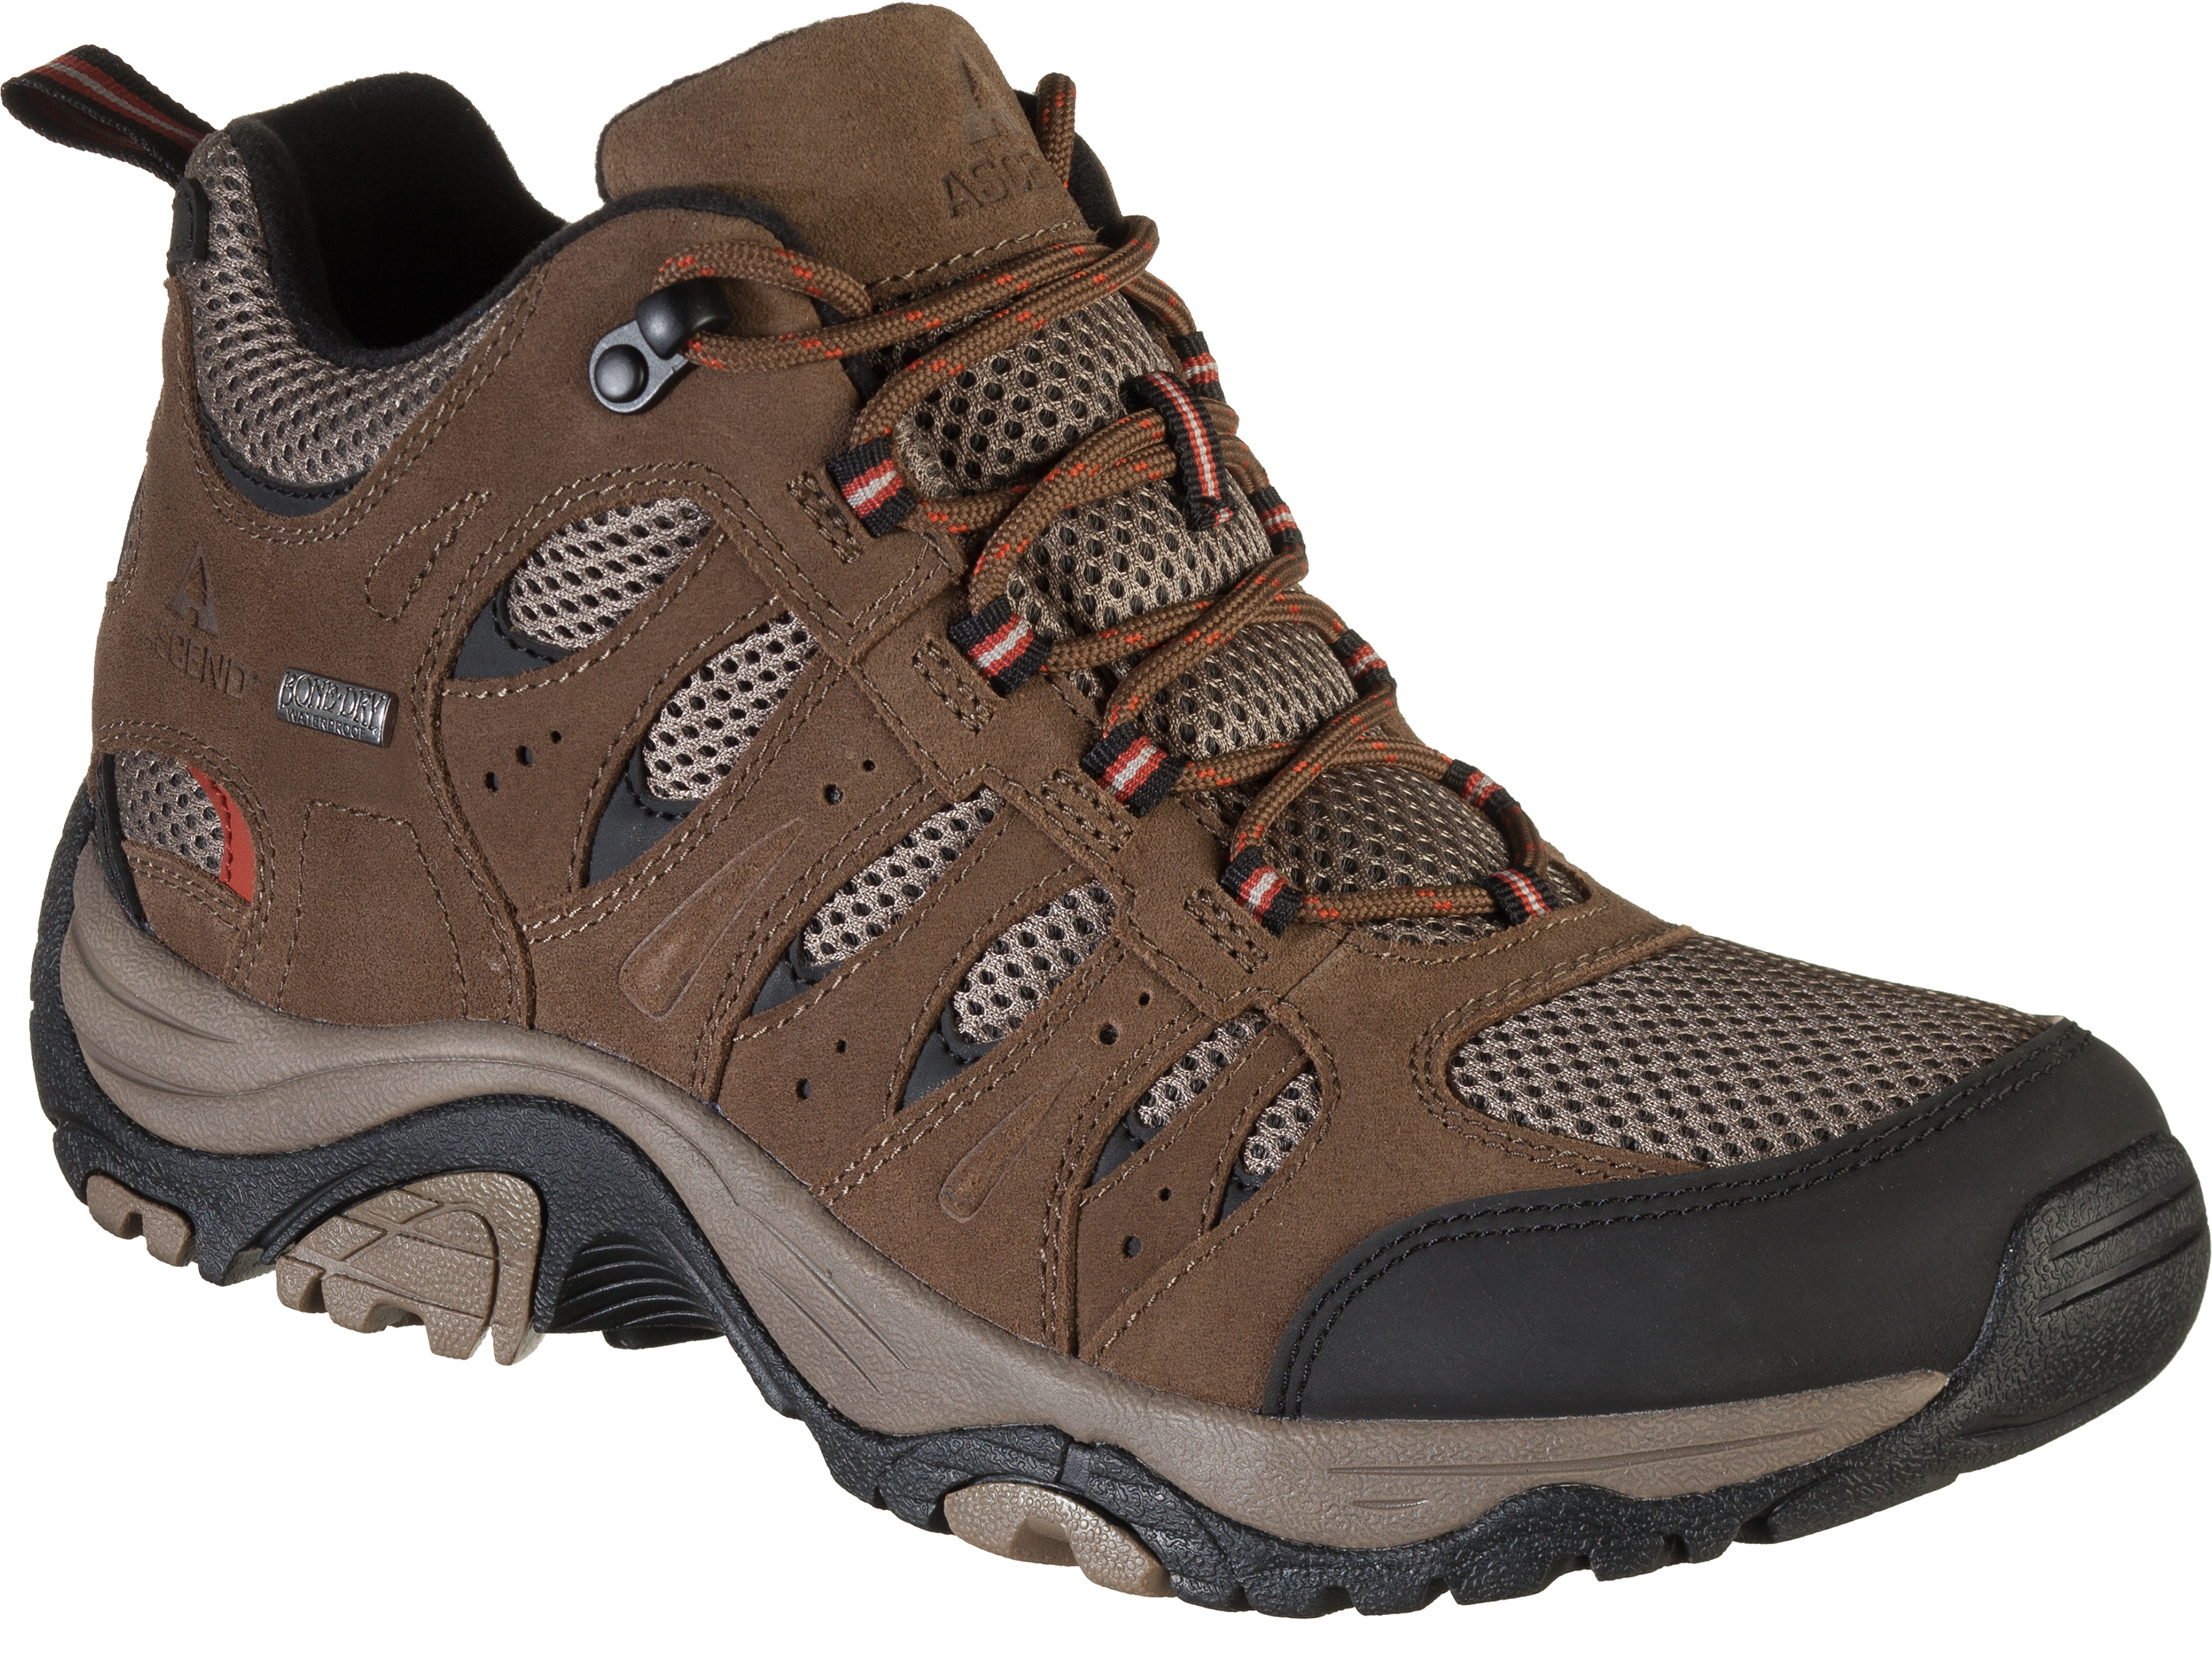 Ascend Lisco Mid Waterproof Hiking Boots for Men - Chocolate - 10M